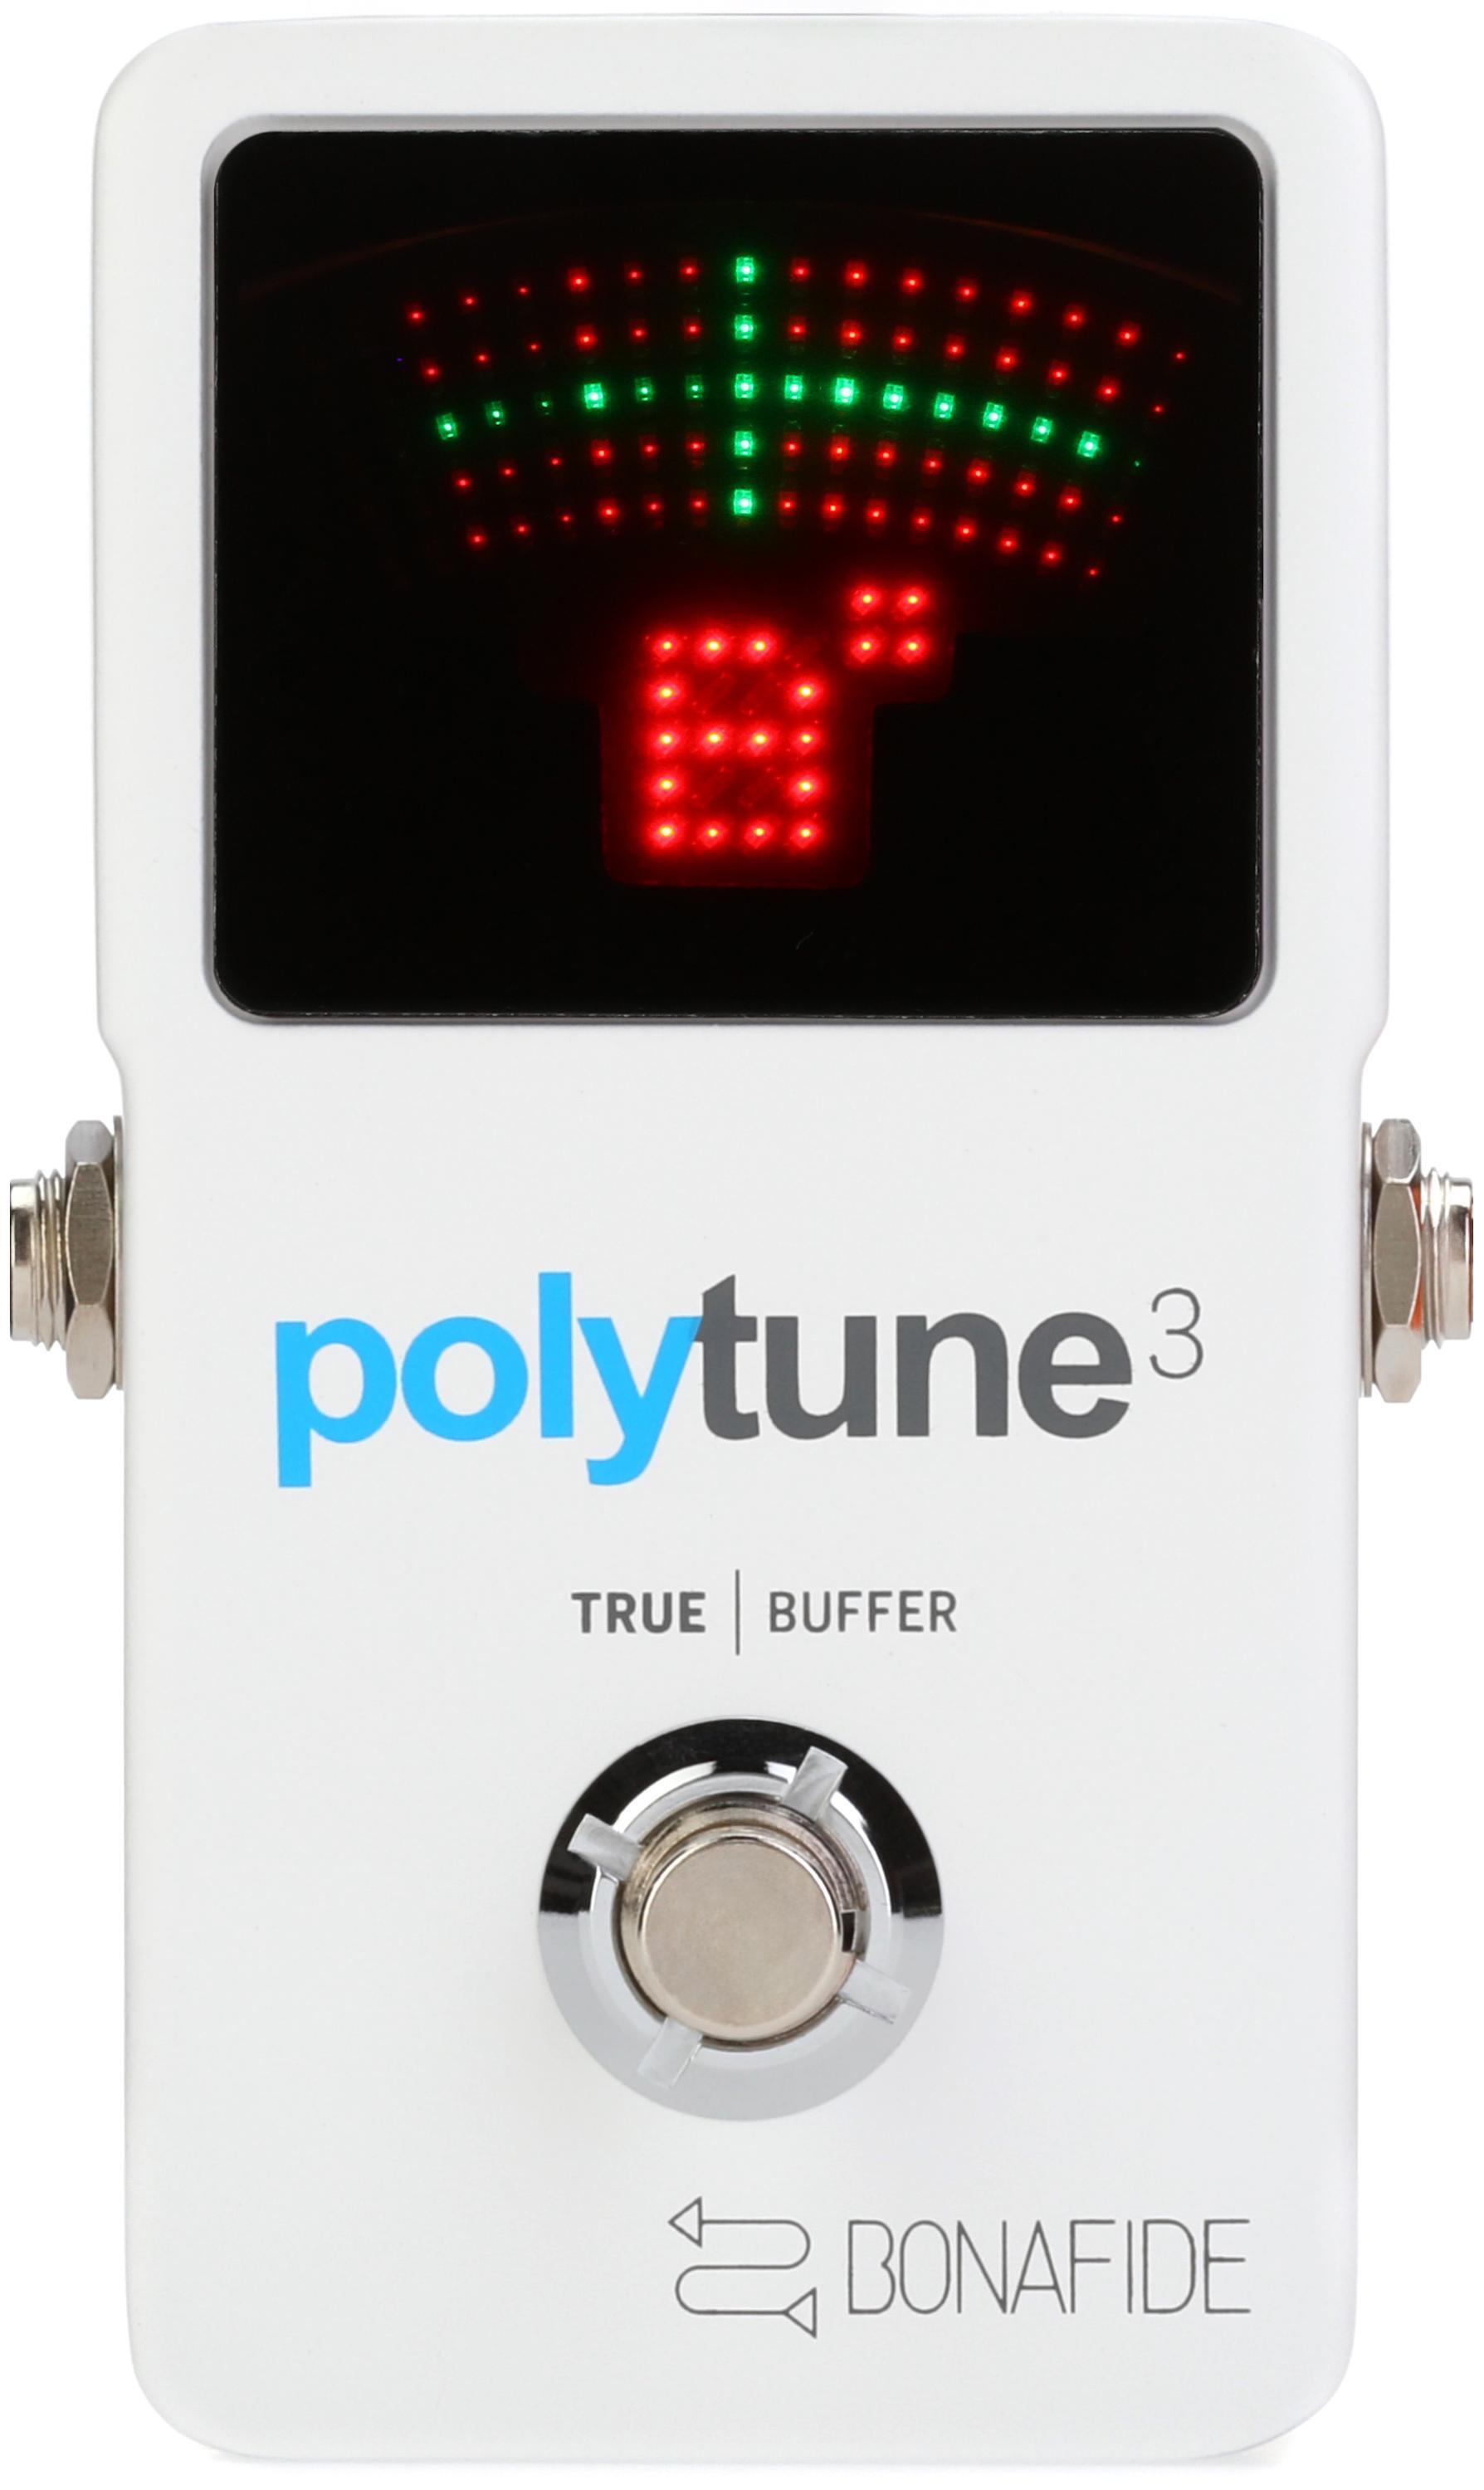 Bundled Item: TC Electronic PolyTune 3 Polyphonic LED Guitar Tuner Pedal with Buffer